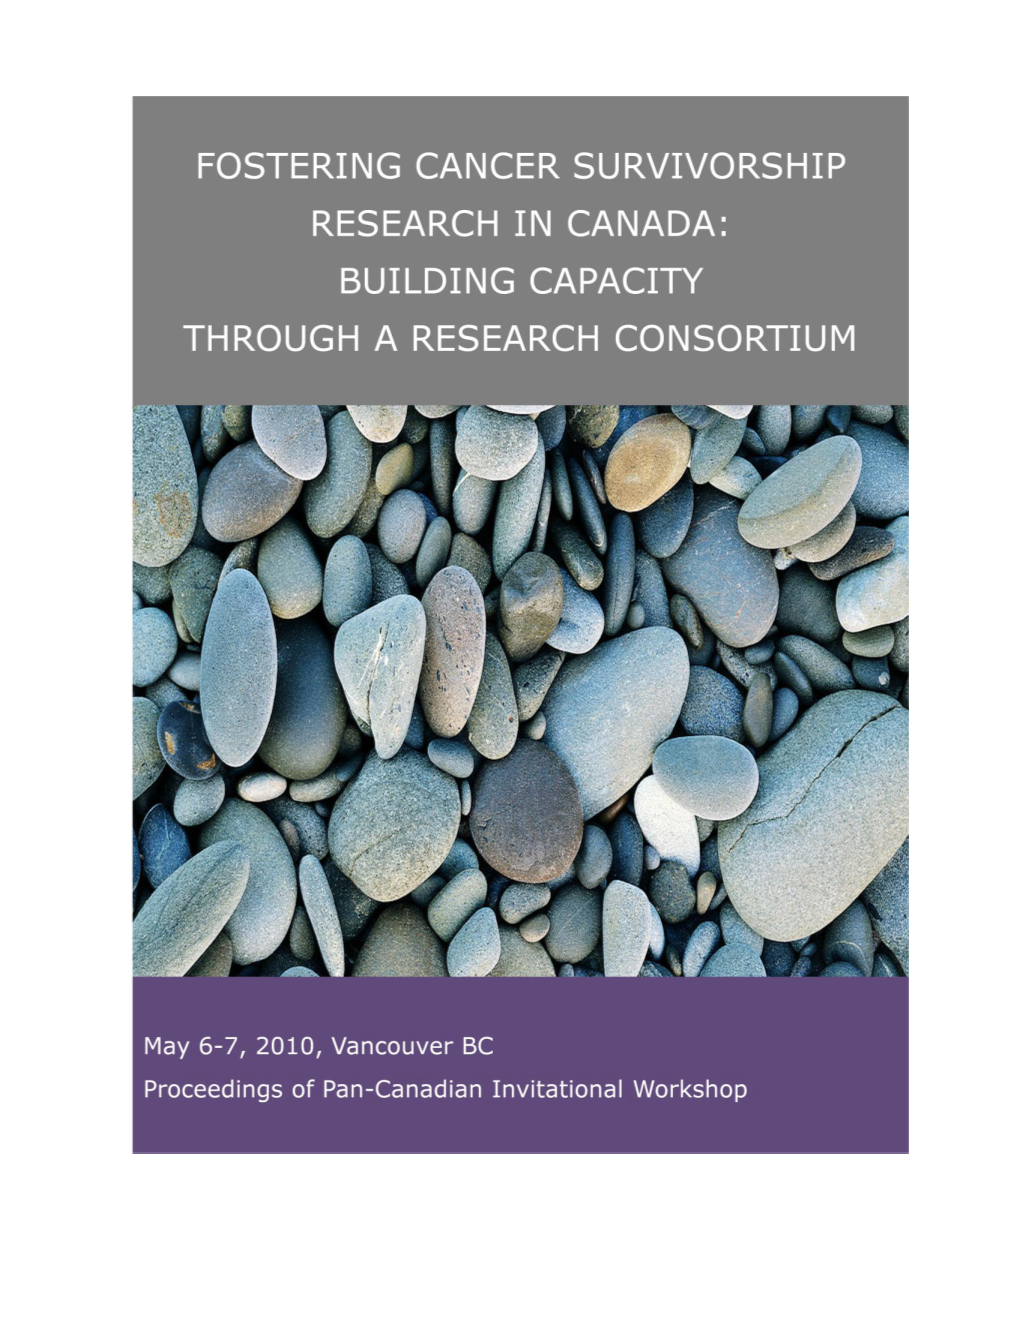 Fostering Cancer Survivorship Research in Canada: Building Capacity Through a Research Consortium